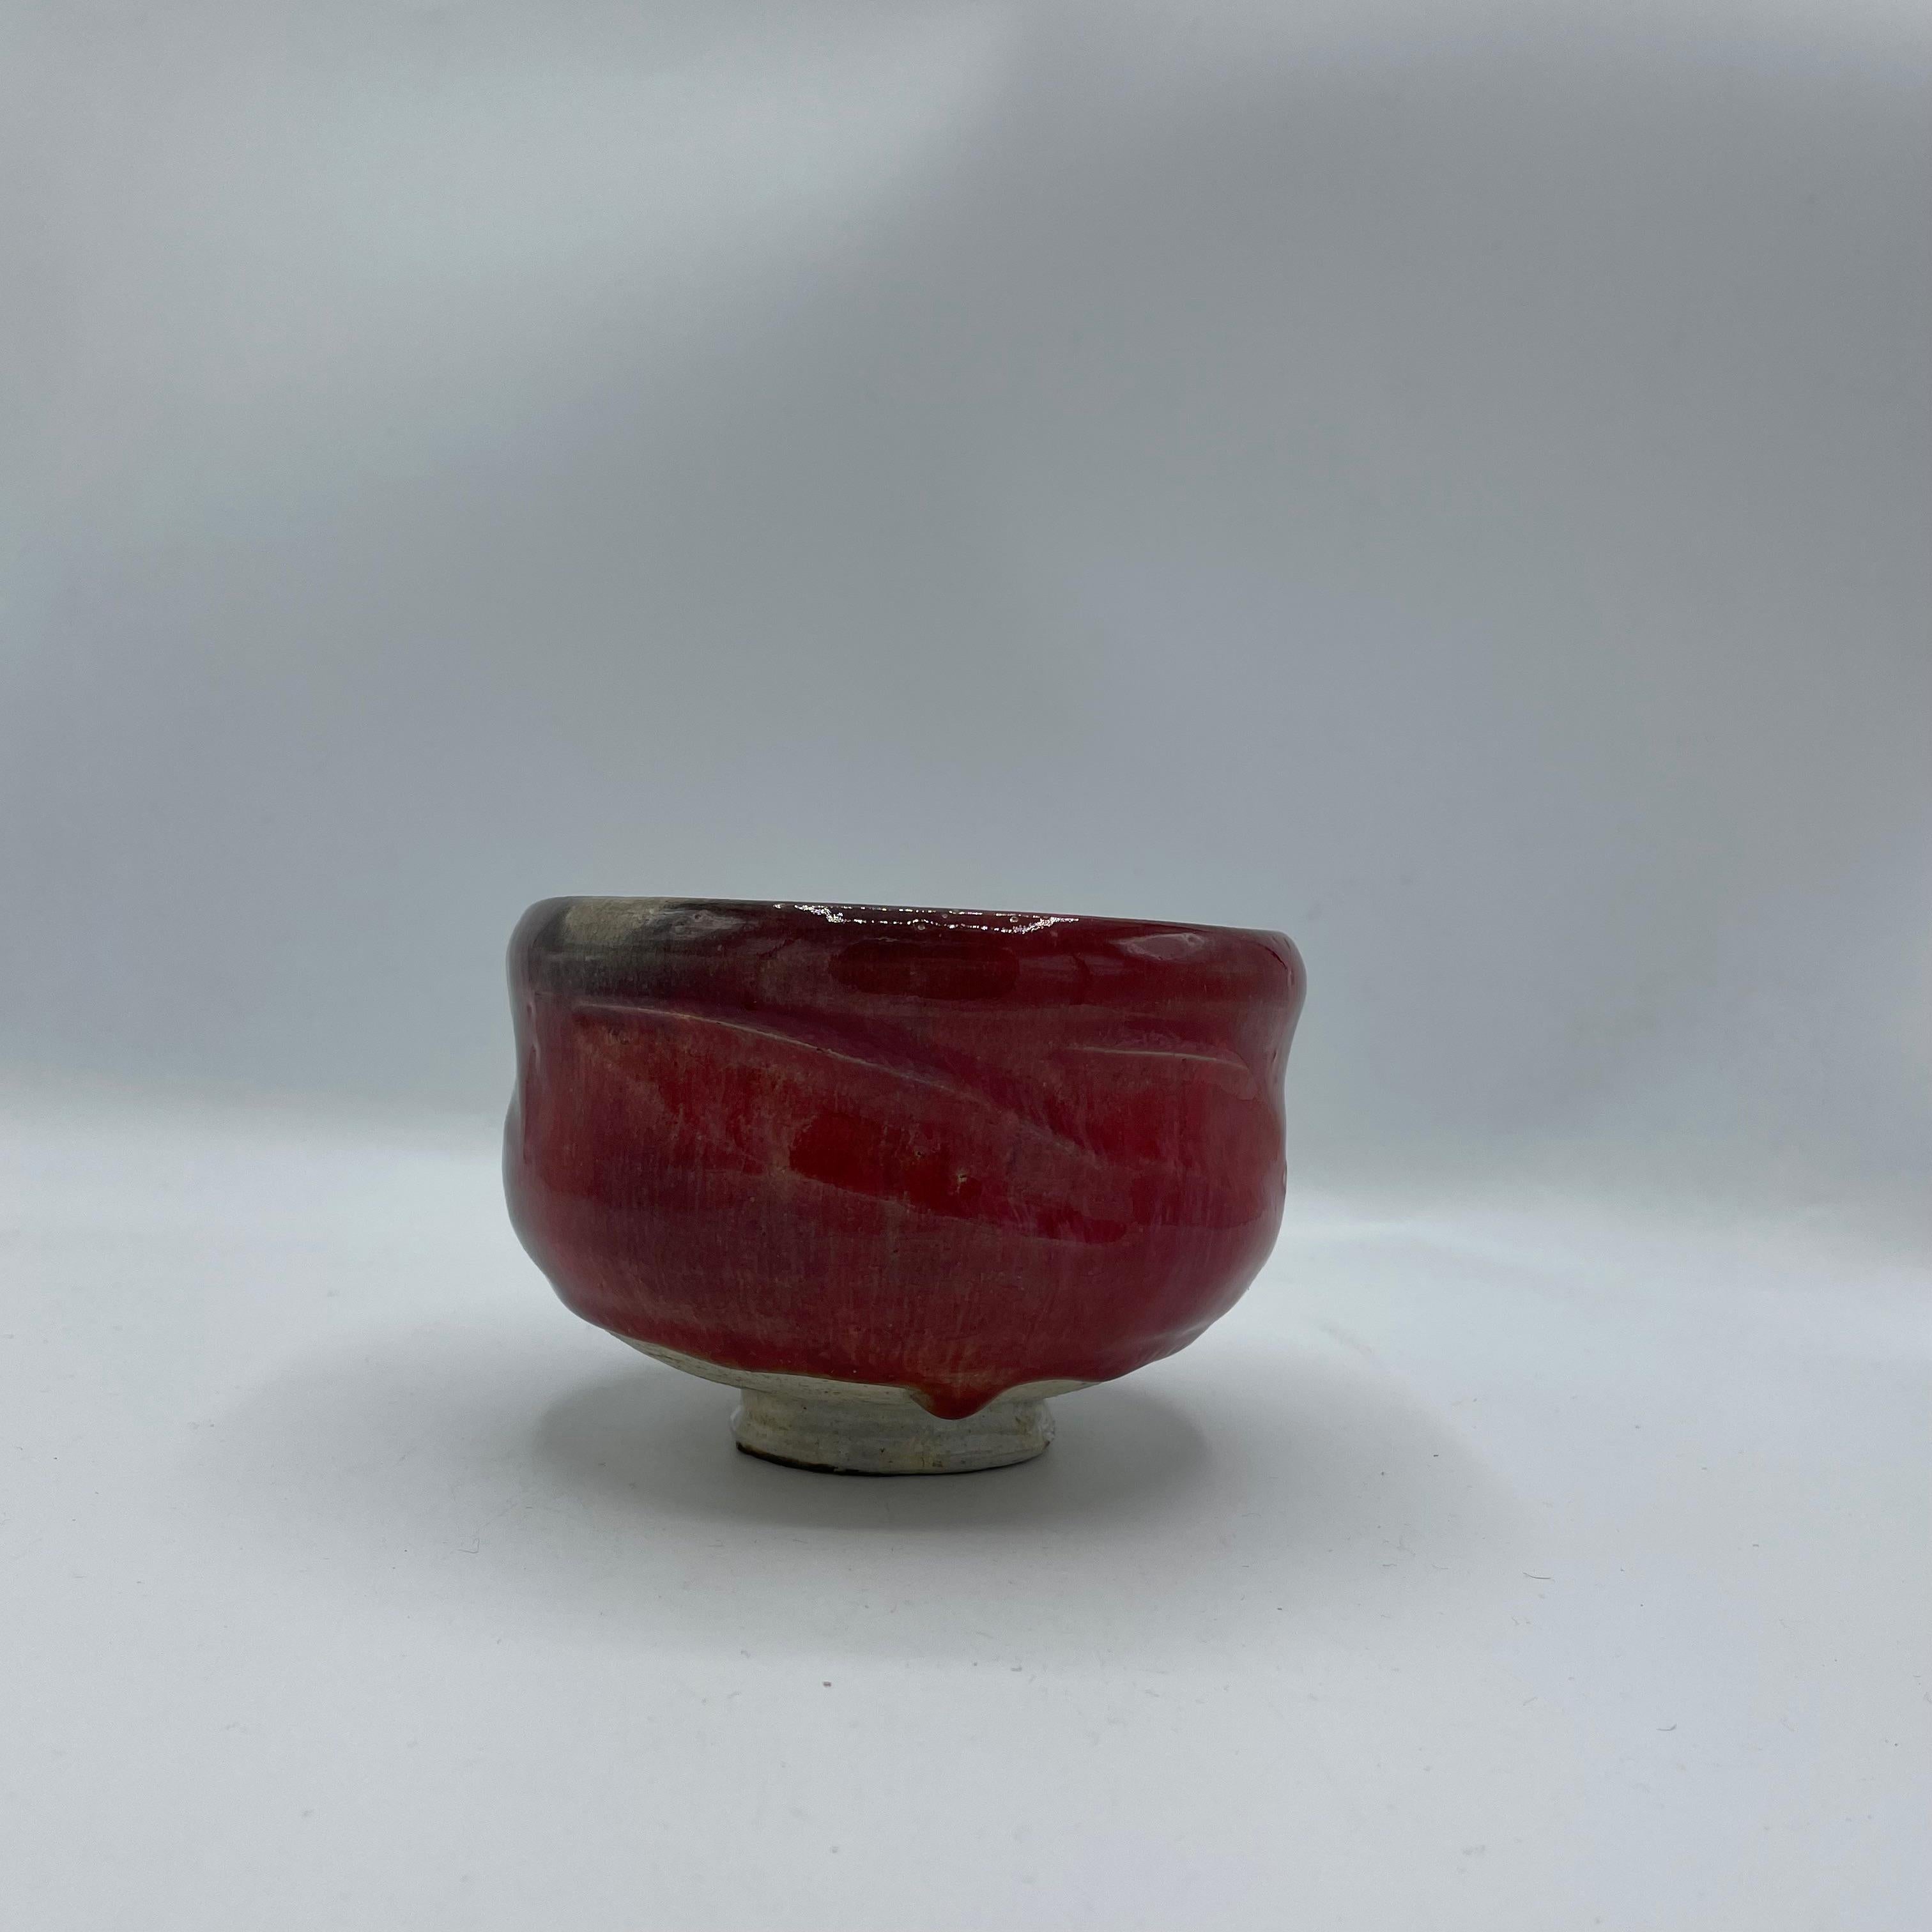 This is a Matcha tea bowl which we use during a tea ceremony.
This bowl was made with style Raku (Raku ware).
This is made with porcelain. 

Raku ware is a type of Japanese pottery traditionally used in Japanese tea ceremonies, most often in the